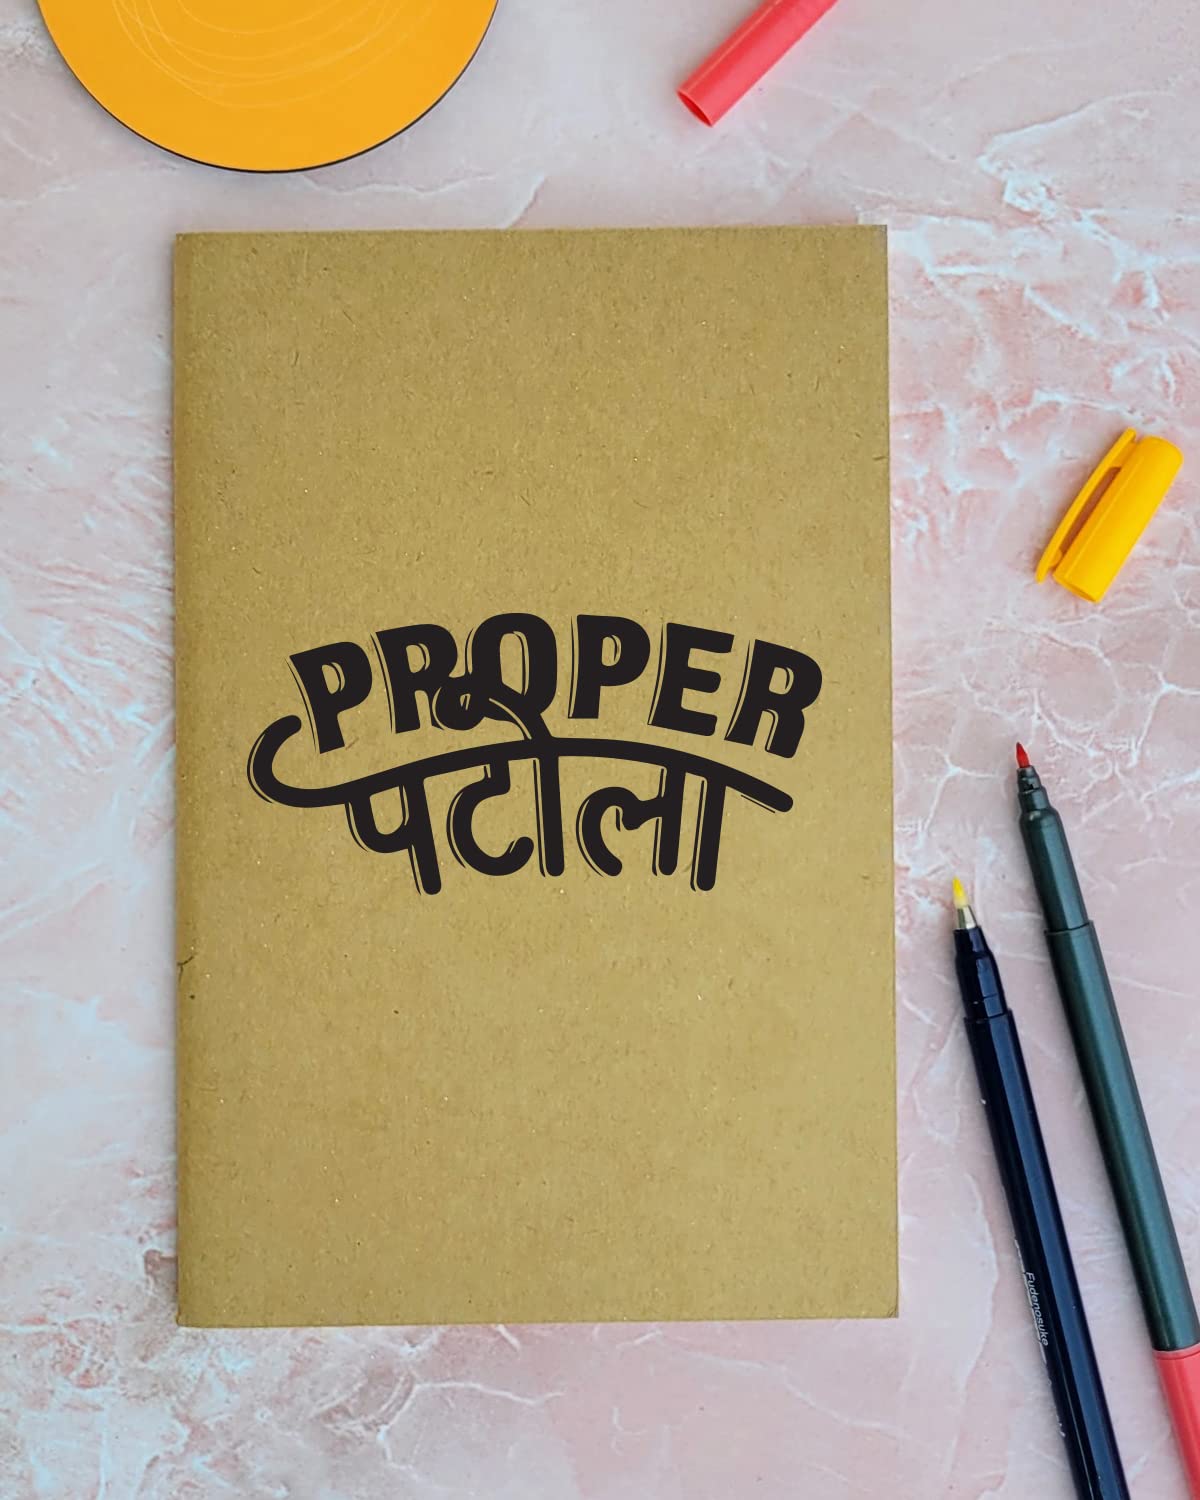 Proper Patola - Brown A5 Doodle Notebook - Kraft Cover Notebook - A5 - 300 GSM Kraft Cover - Handmade - Unruled - 80 Pages - Natural Shade Pages 120 GSM - Funny Quotes & Quirky, Funky designs